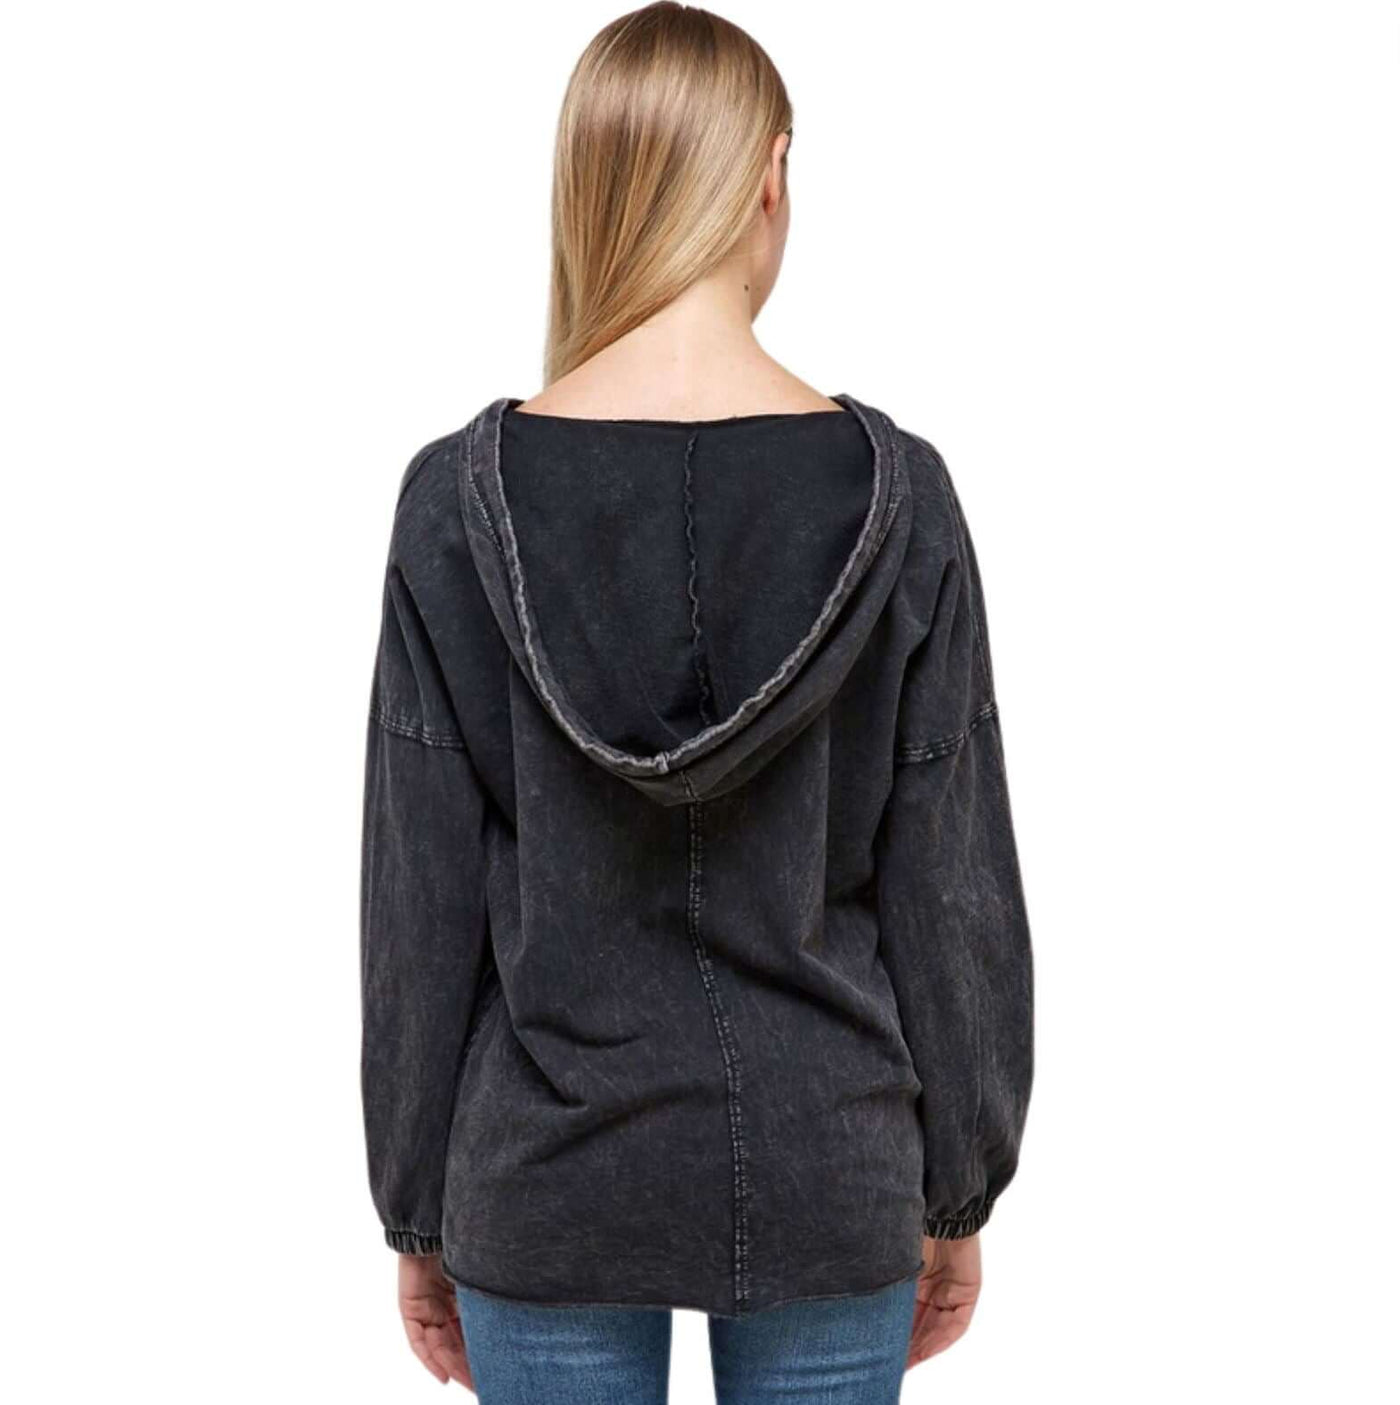 USA made ladies relaxed fit 100% cotton mineral washed tunic with drawstring hoodie in Washed Black | Classy Cozy Cool Women's Made in America Boutique